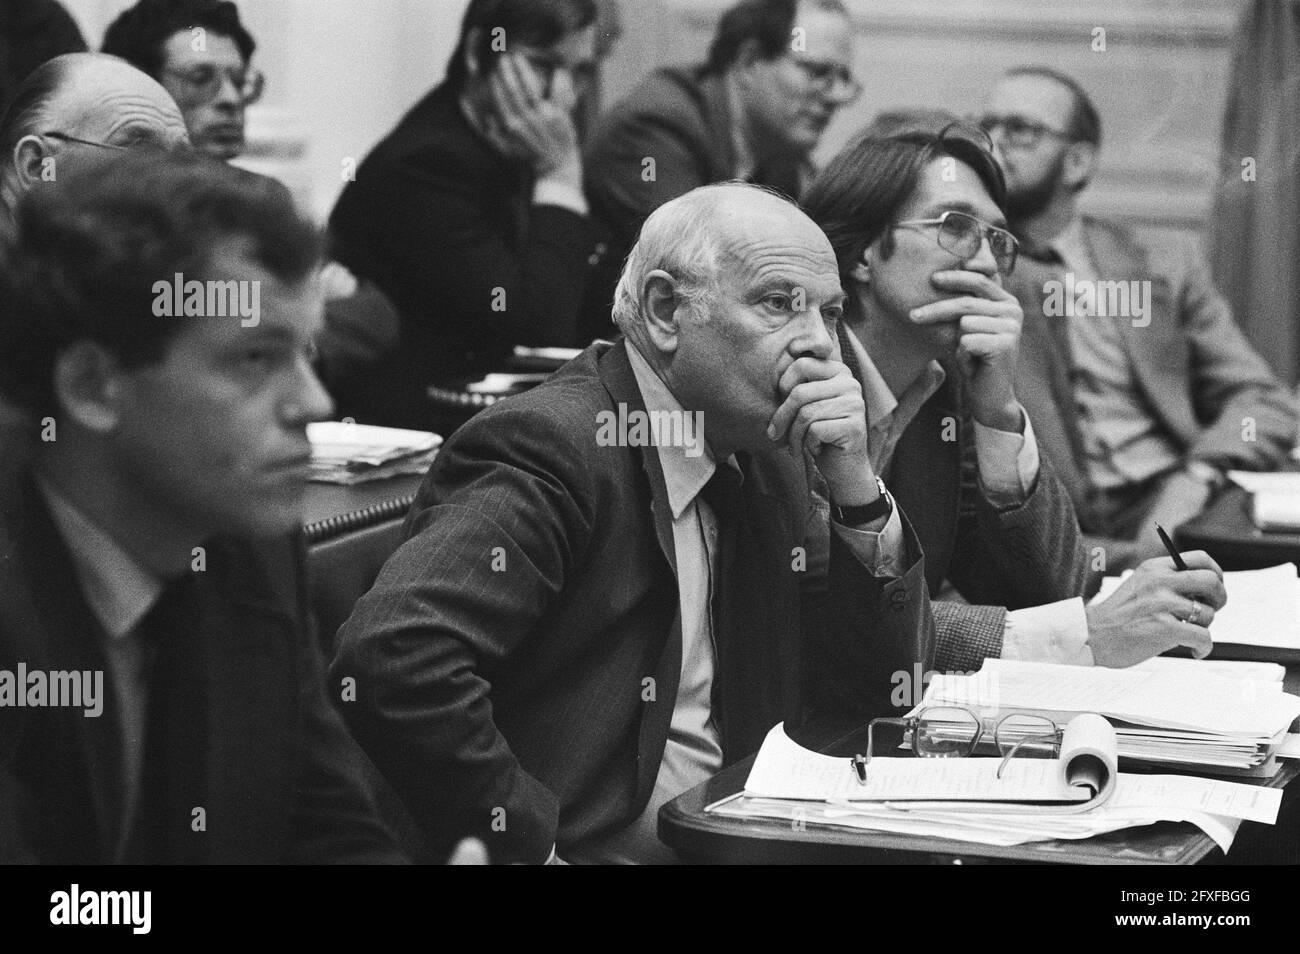 House of Representatives, general considerations, second round, Den Uyl to microphone in the case, October 10, 1980, ORDERS, microphones, The Netherlands, 20th century press agency photo, news to remember, documentary, historic photography 1945-1990, visual stories, human history of the Twentieth Century, capturing moments in time Stock Photo